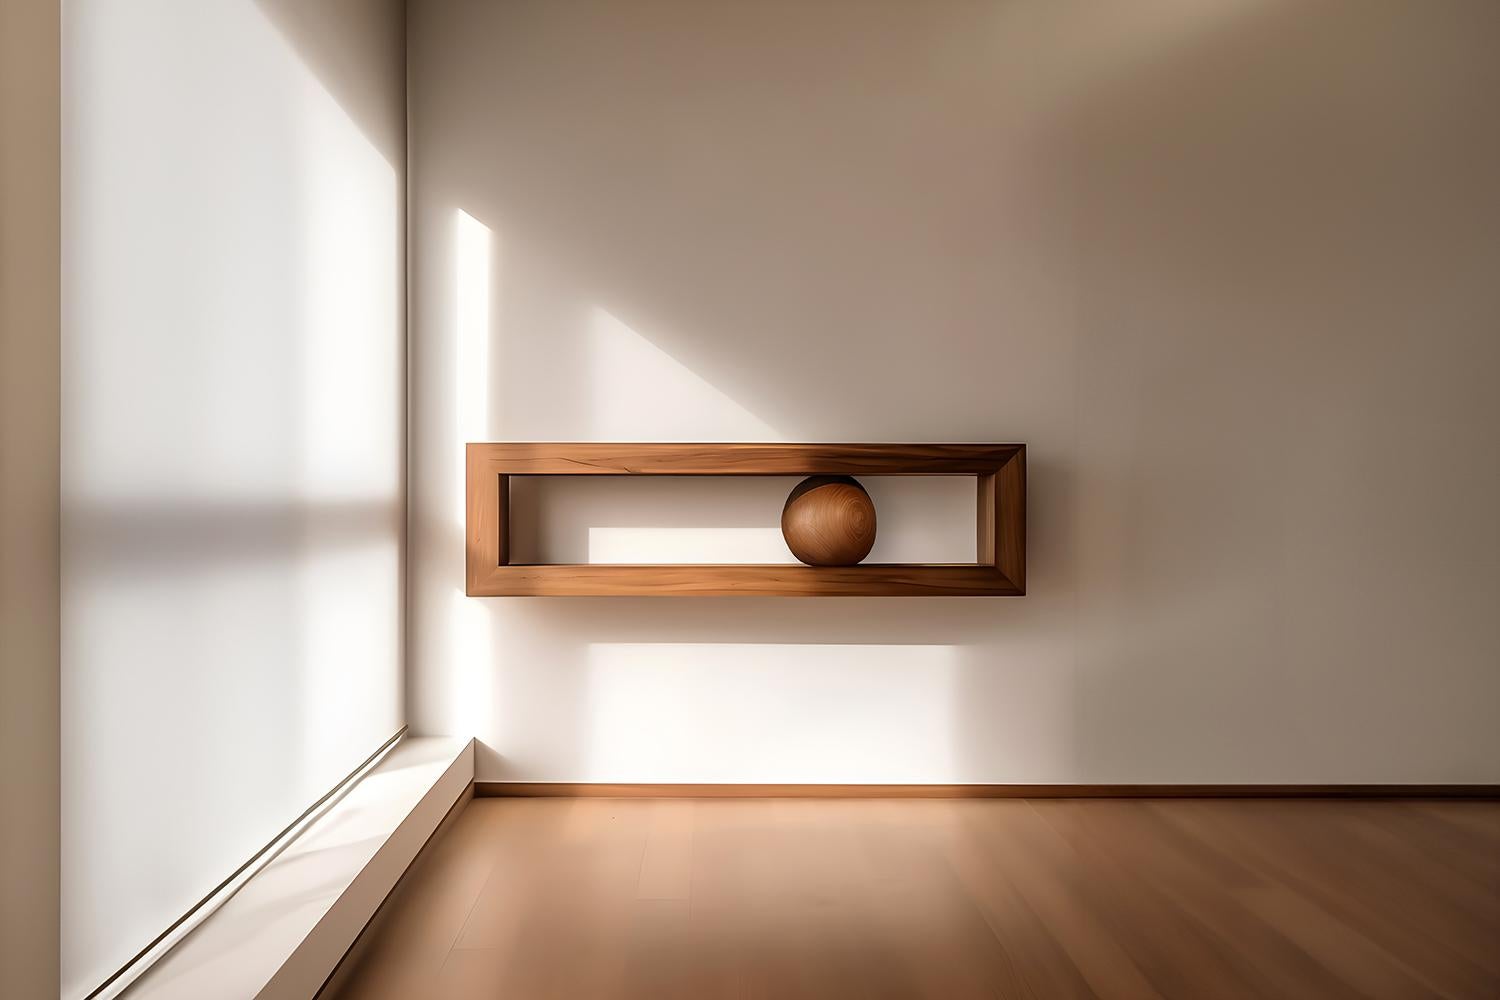 Mexican Rectangular Floating Shelf and One Large Sculptural Wooden Pebble Sereno by Nono For Sale